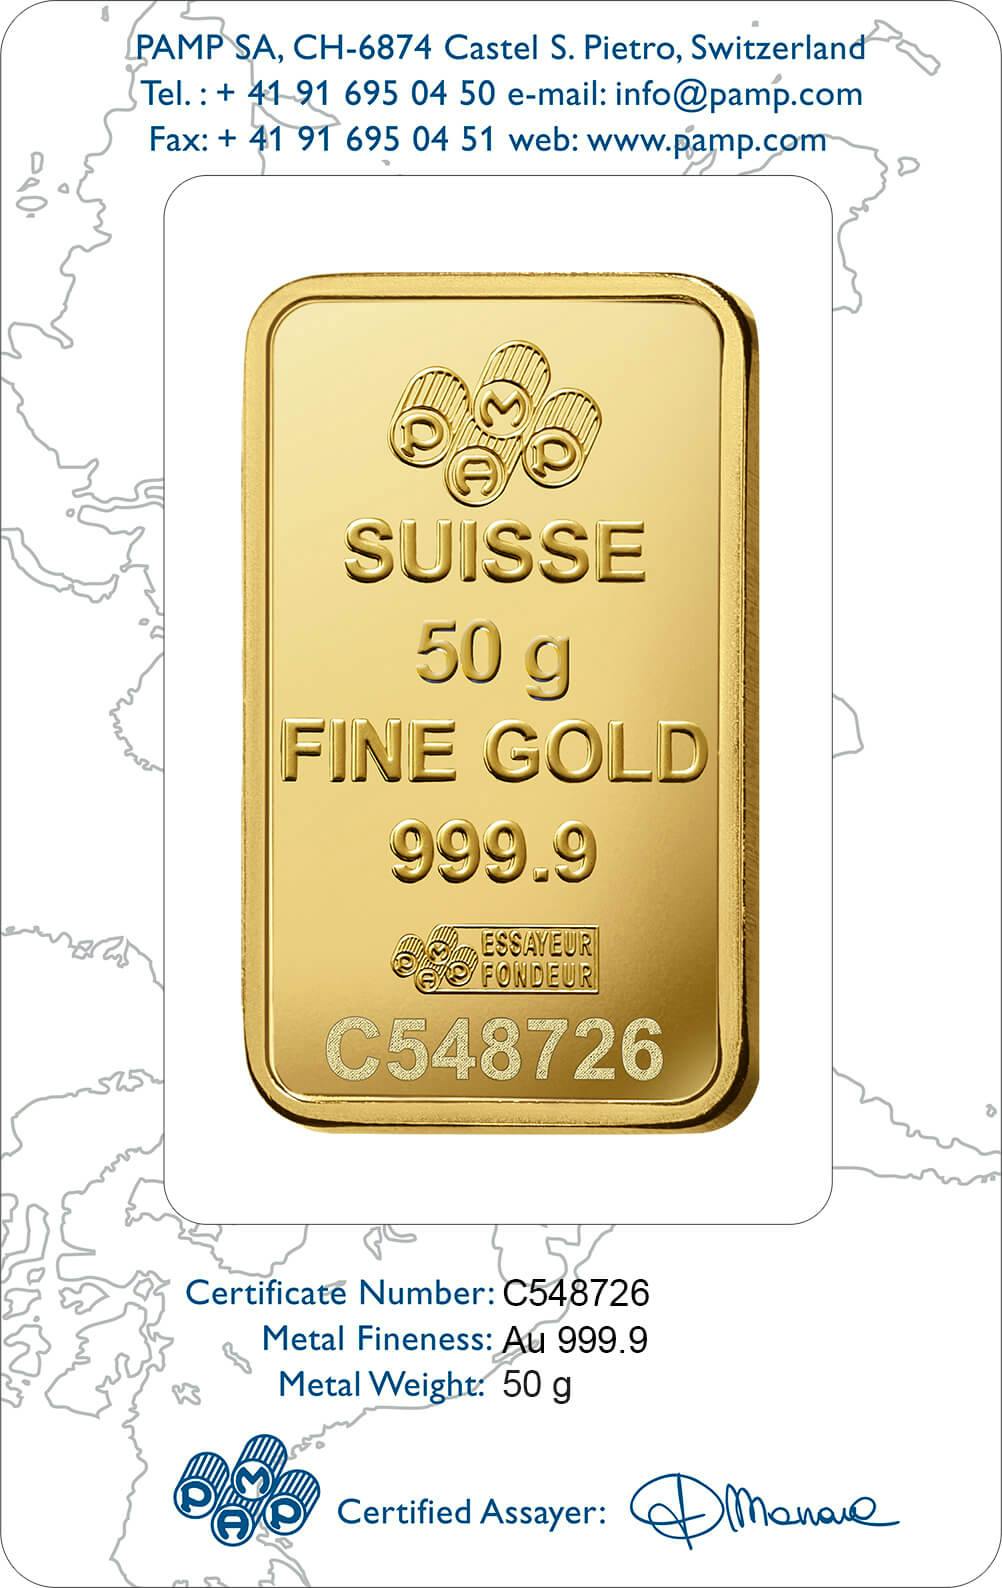 Invest in 50 gram Fine Gold Liberty - PAMP Swiss - Back